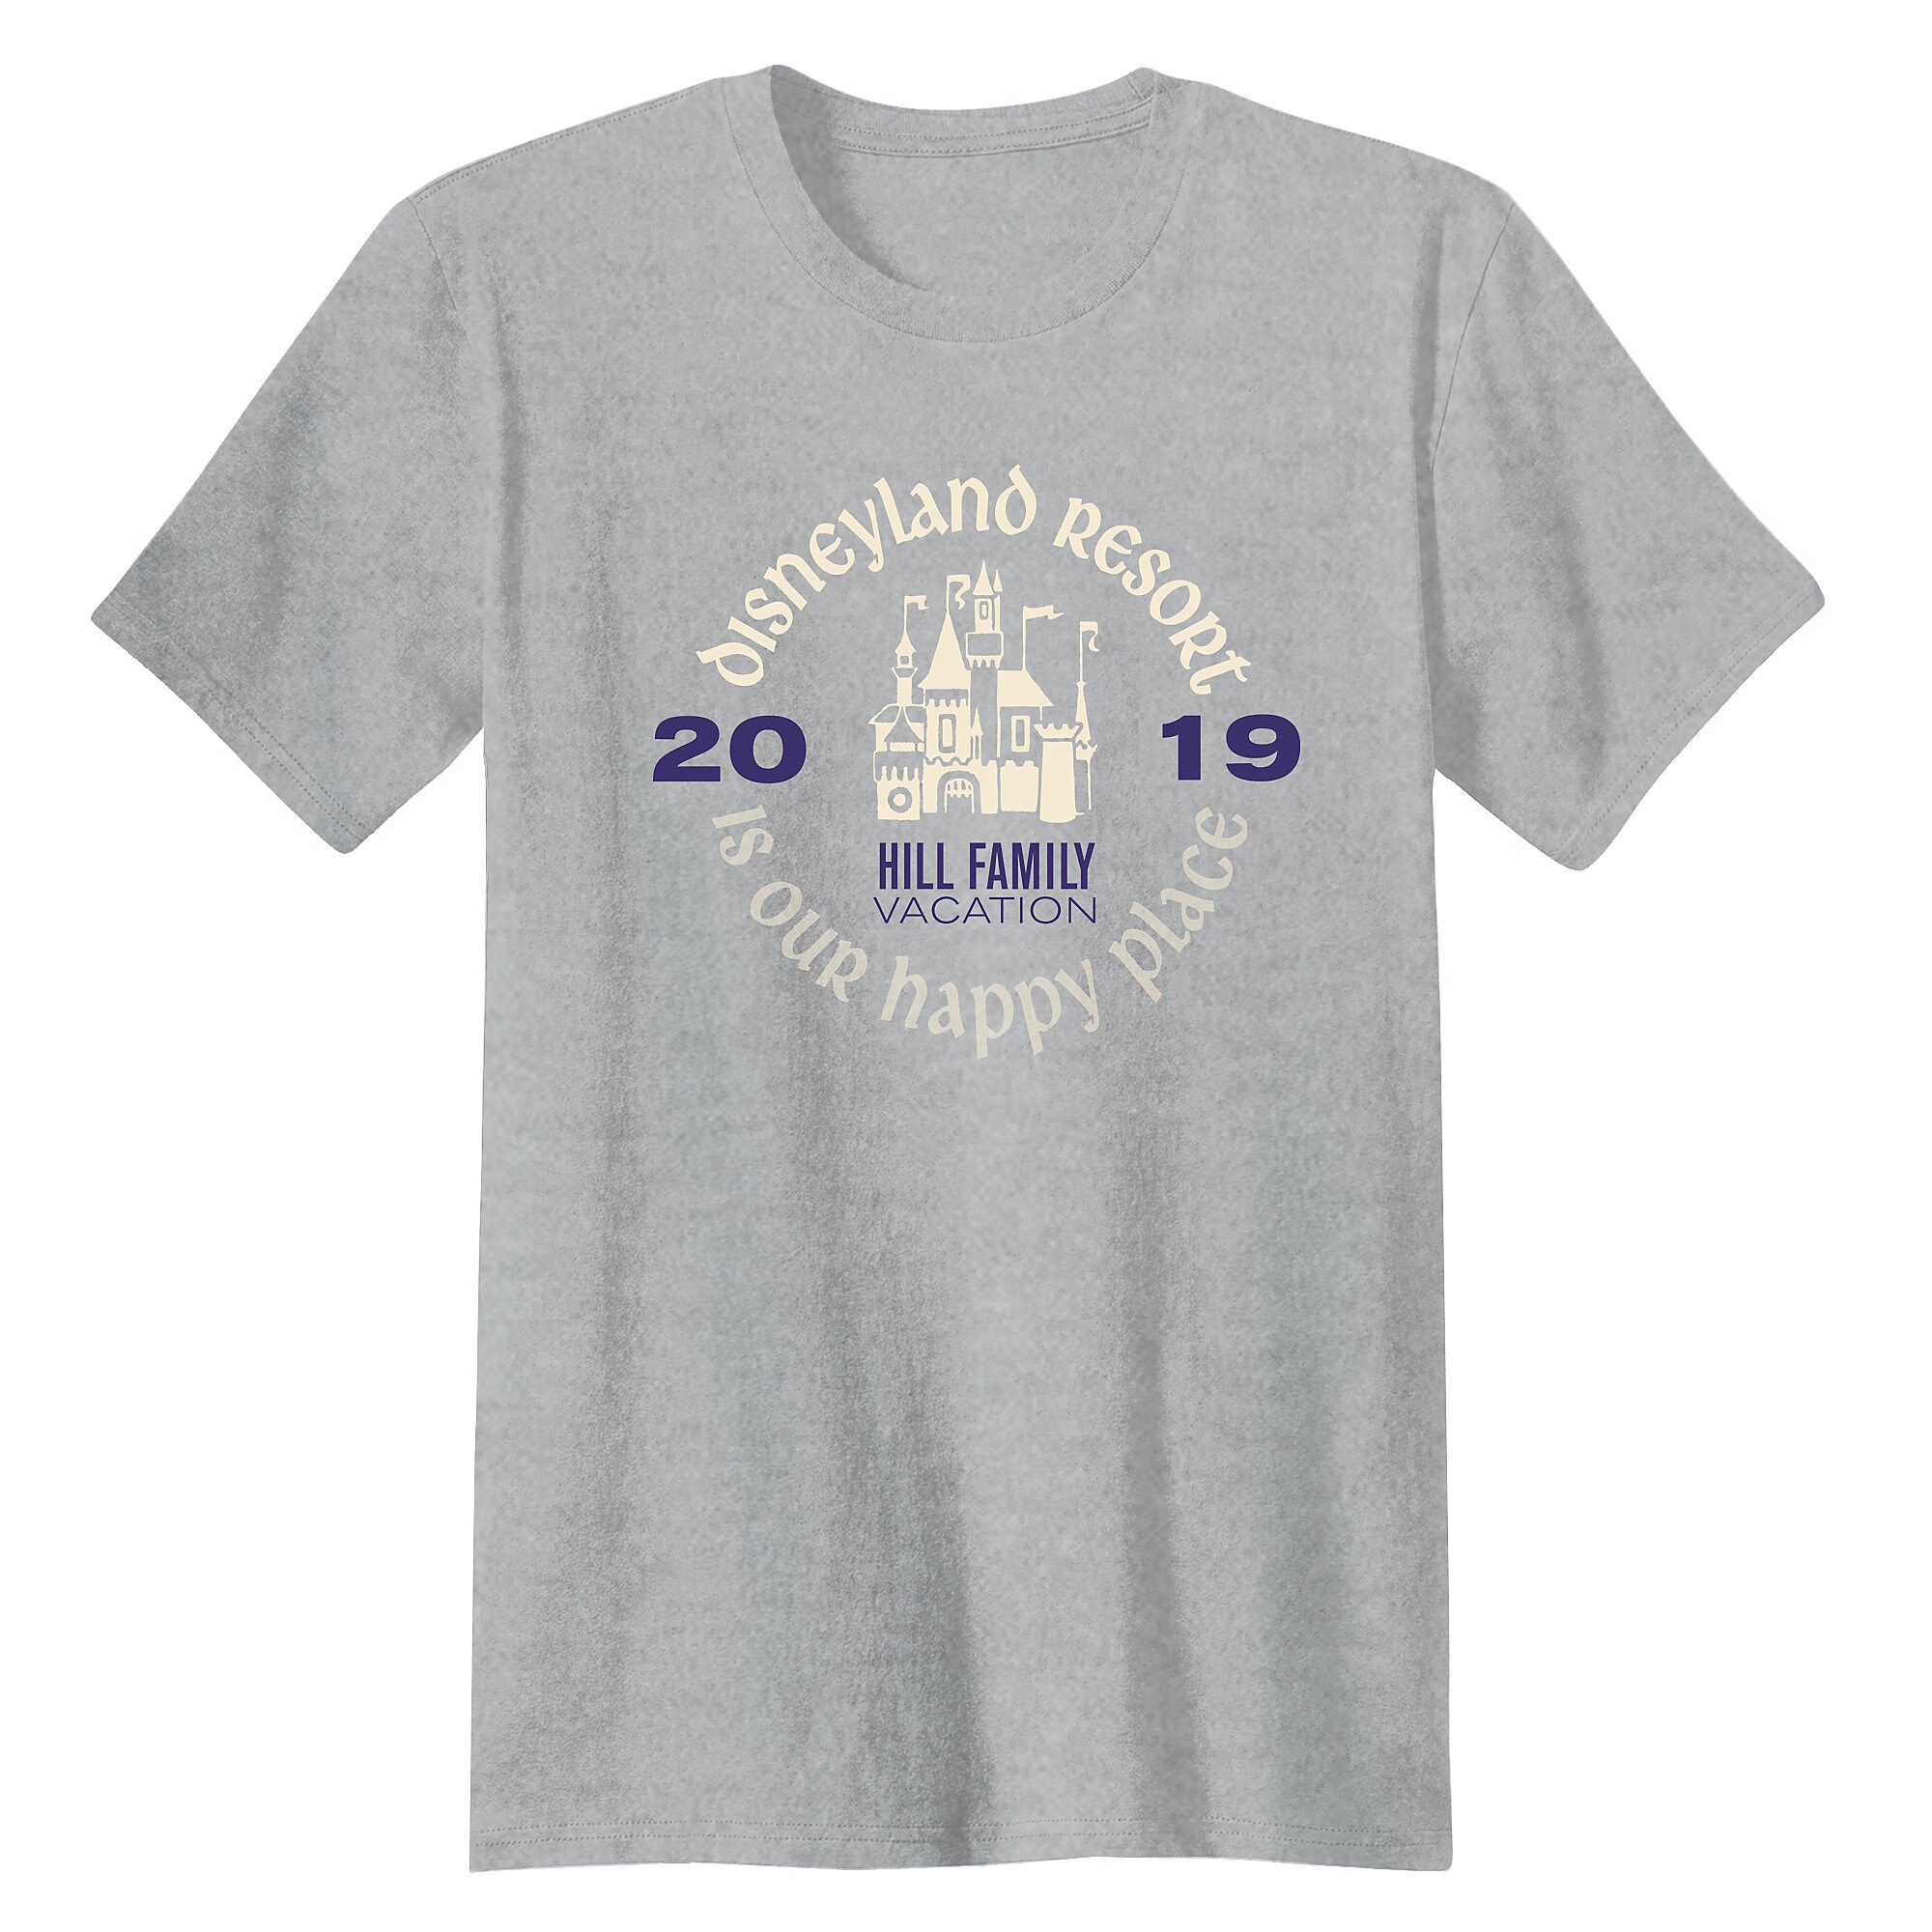 Adults' ''Disneyland Resort Is Our Happy Place'' Family Vacation T-Shirt - Disneyland Resort - 2019 - Customized